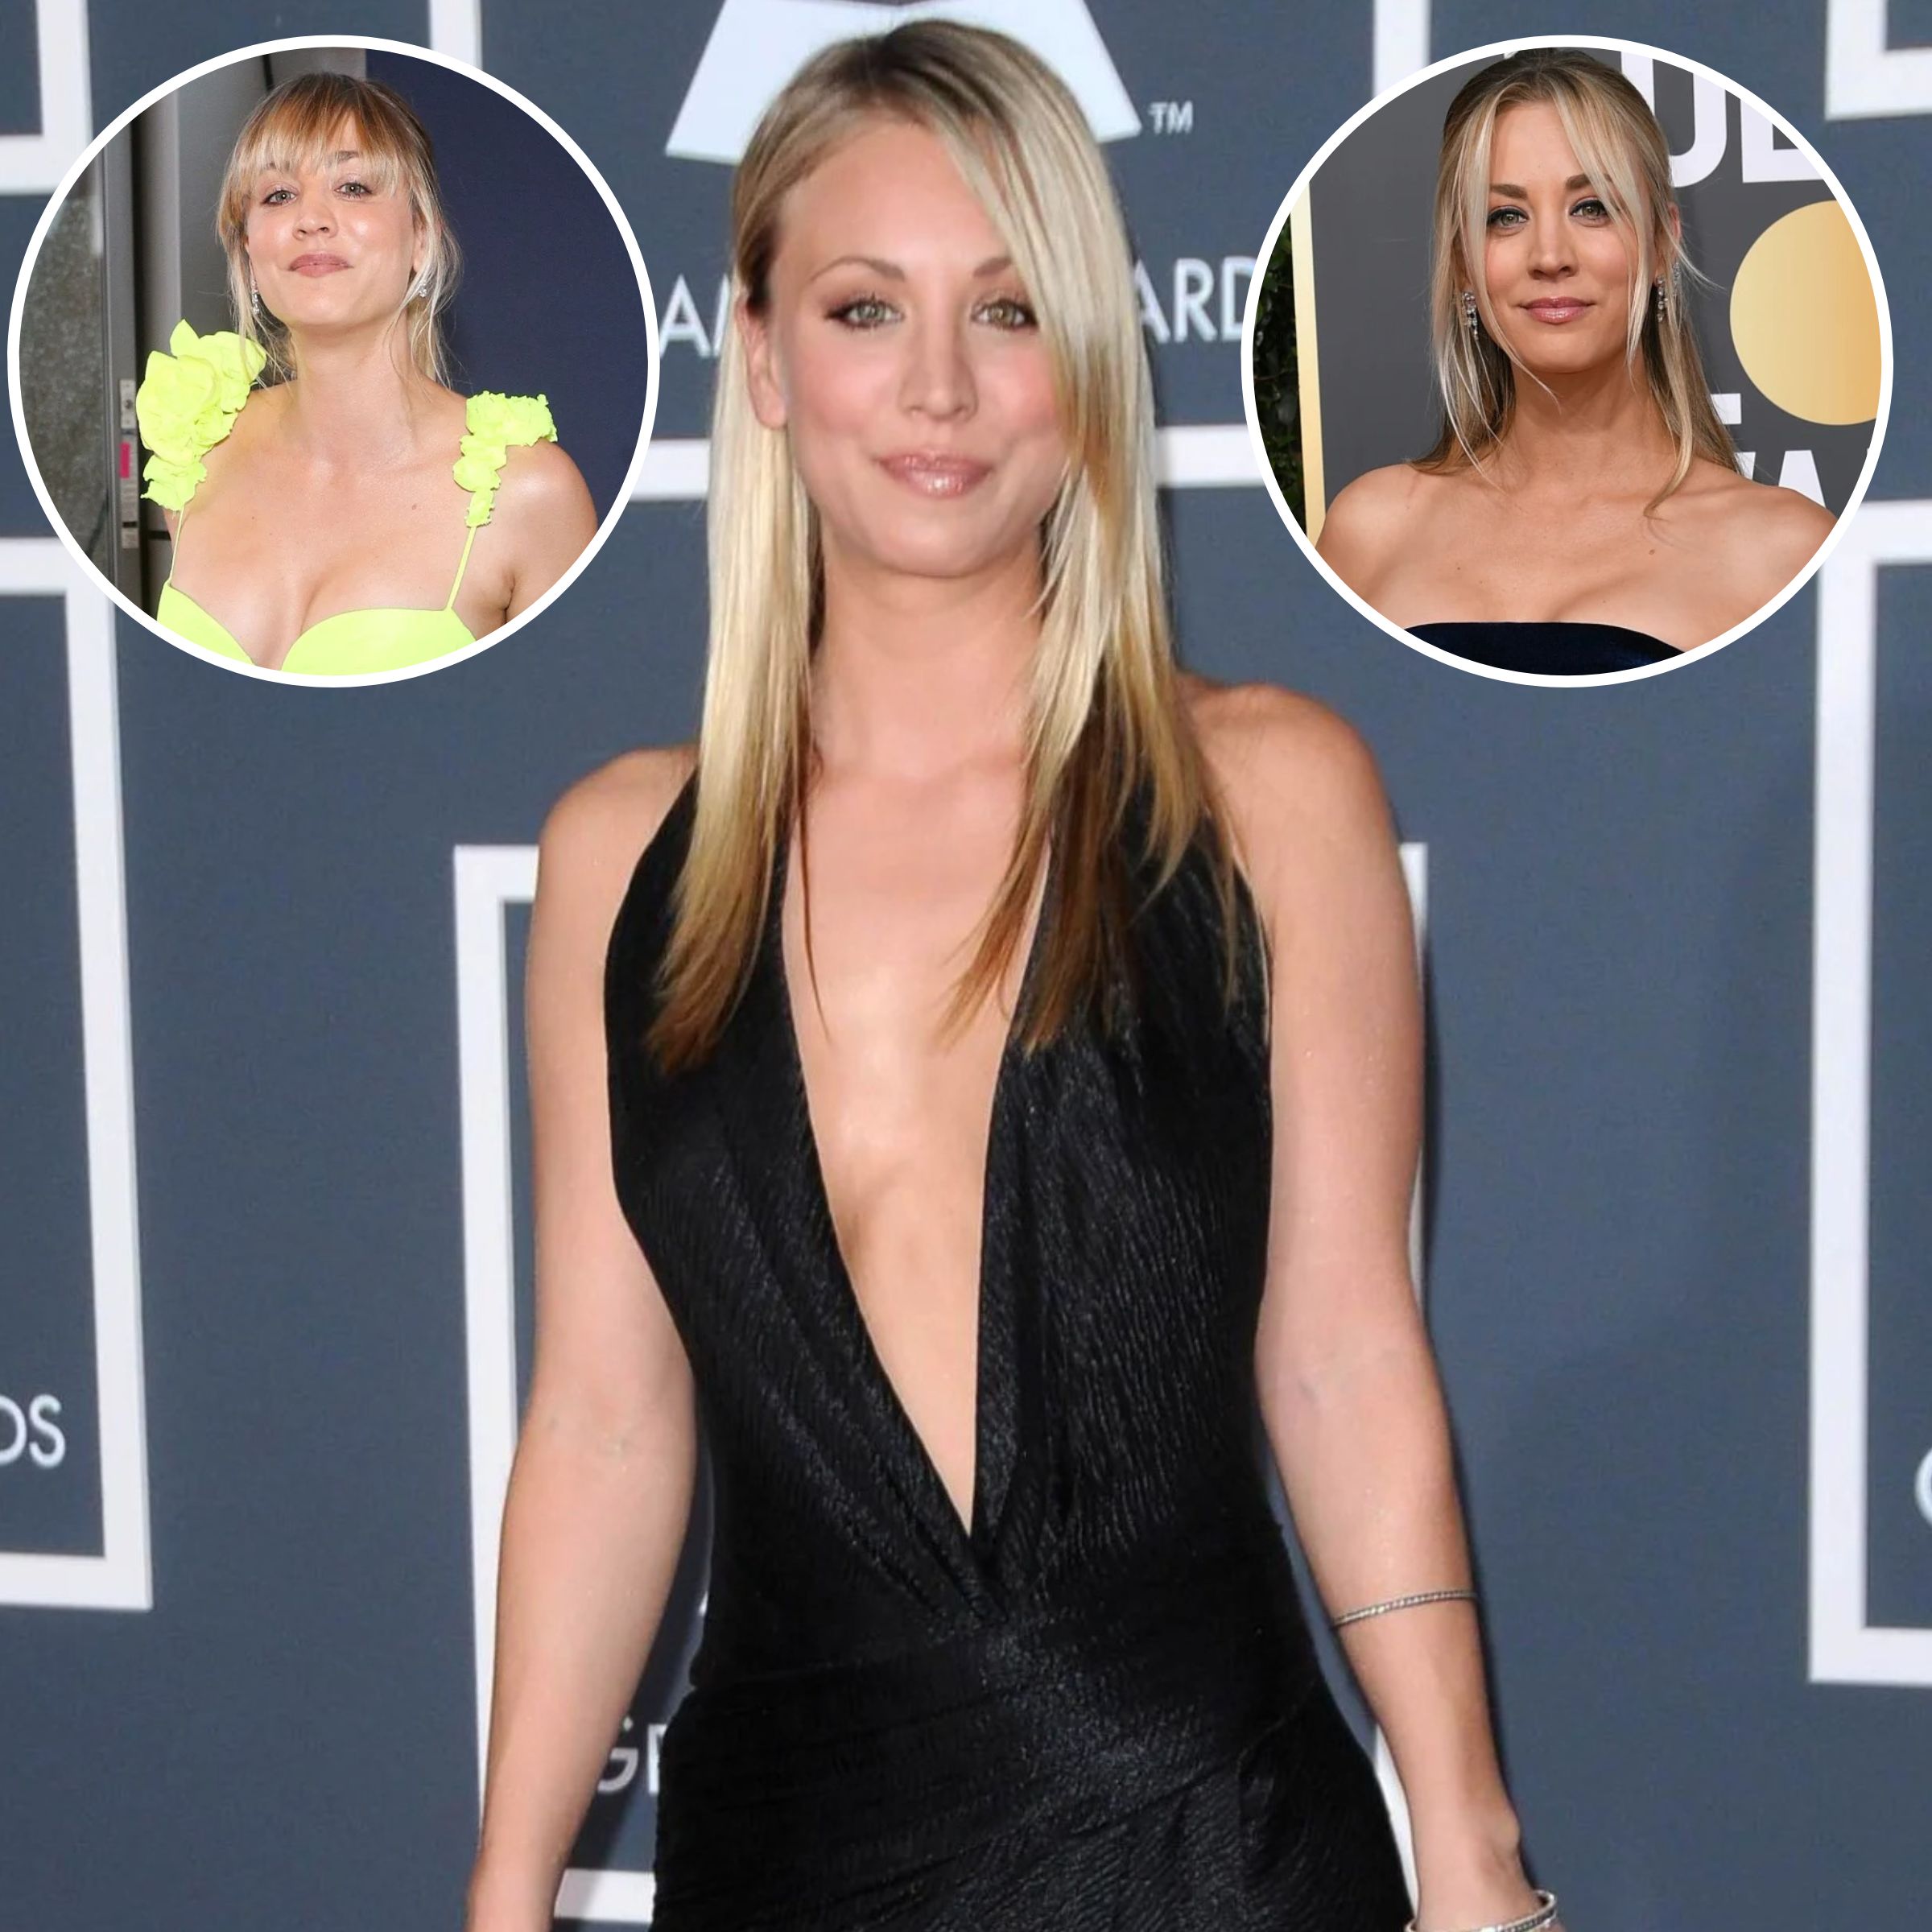 Cuoco Sexy - Kaley Cuoco Braless: Photos of the Actress Without a Bra